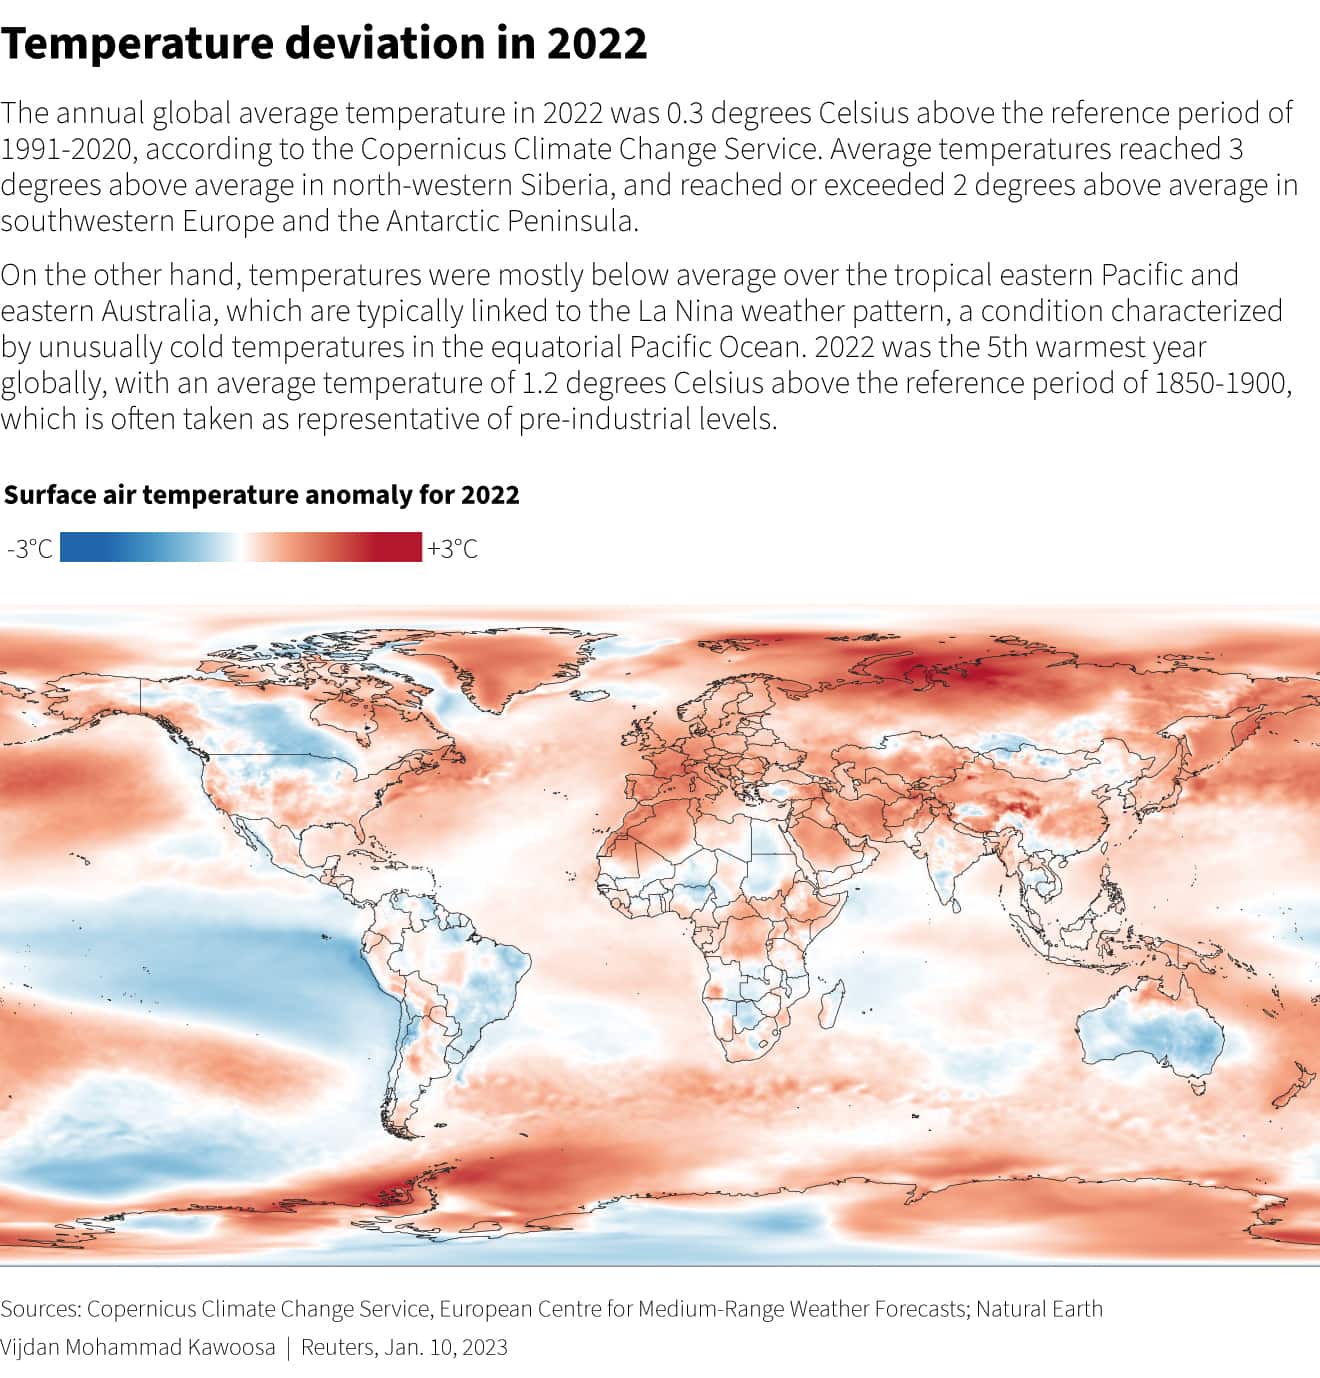 The European Union's Copernicus Climate Change Service shared its findings on global climate for 2022, projecting annual global average temperatures in 2022 to be 0.3°C higher than the 1991-2020 reference period.